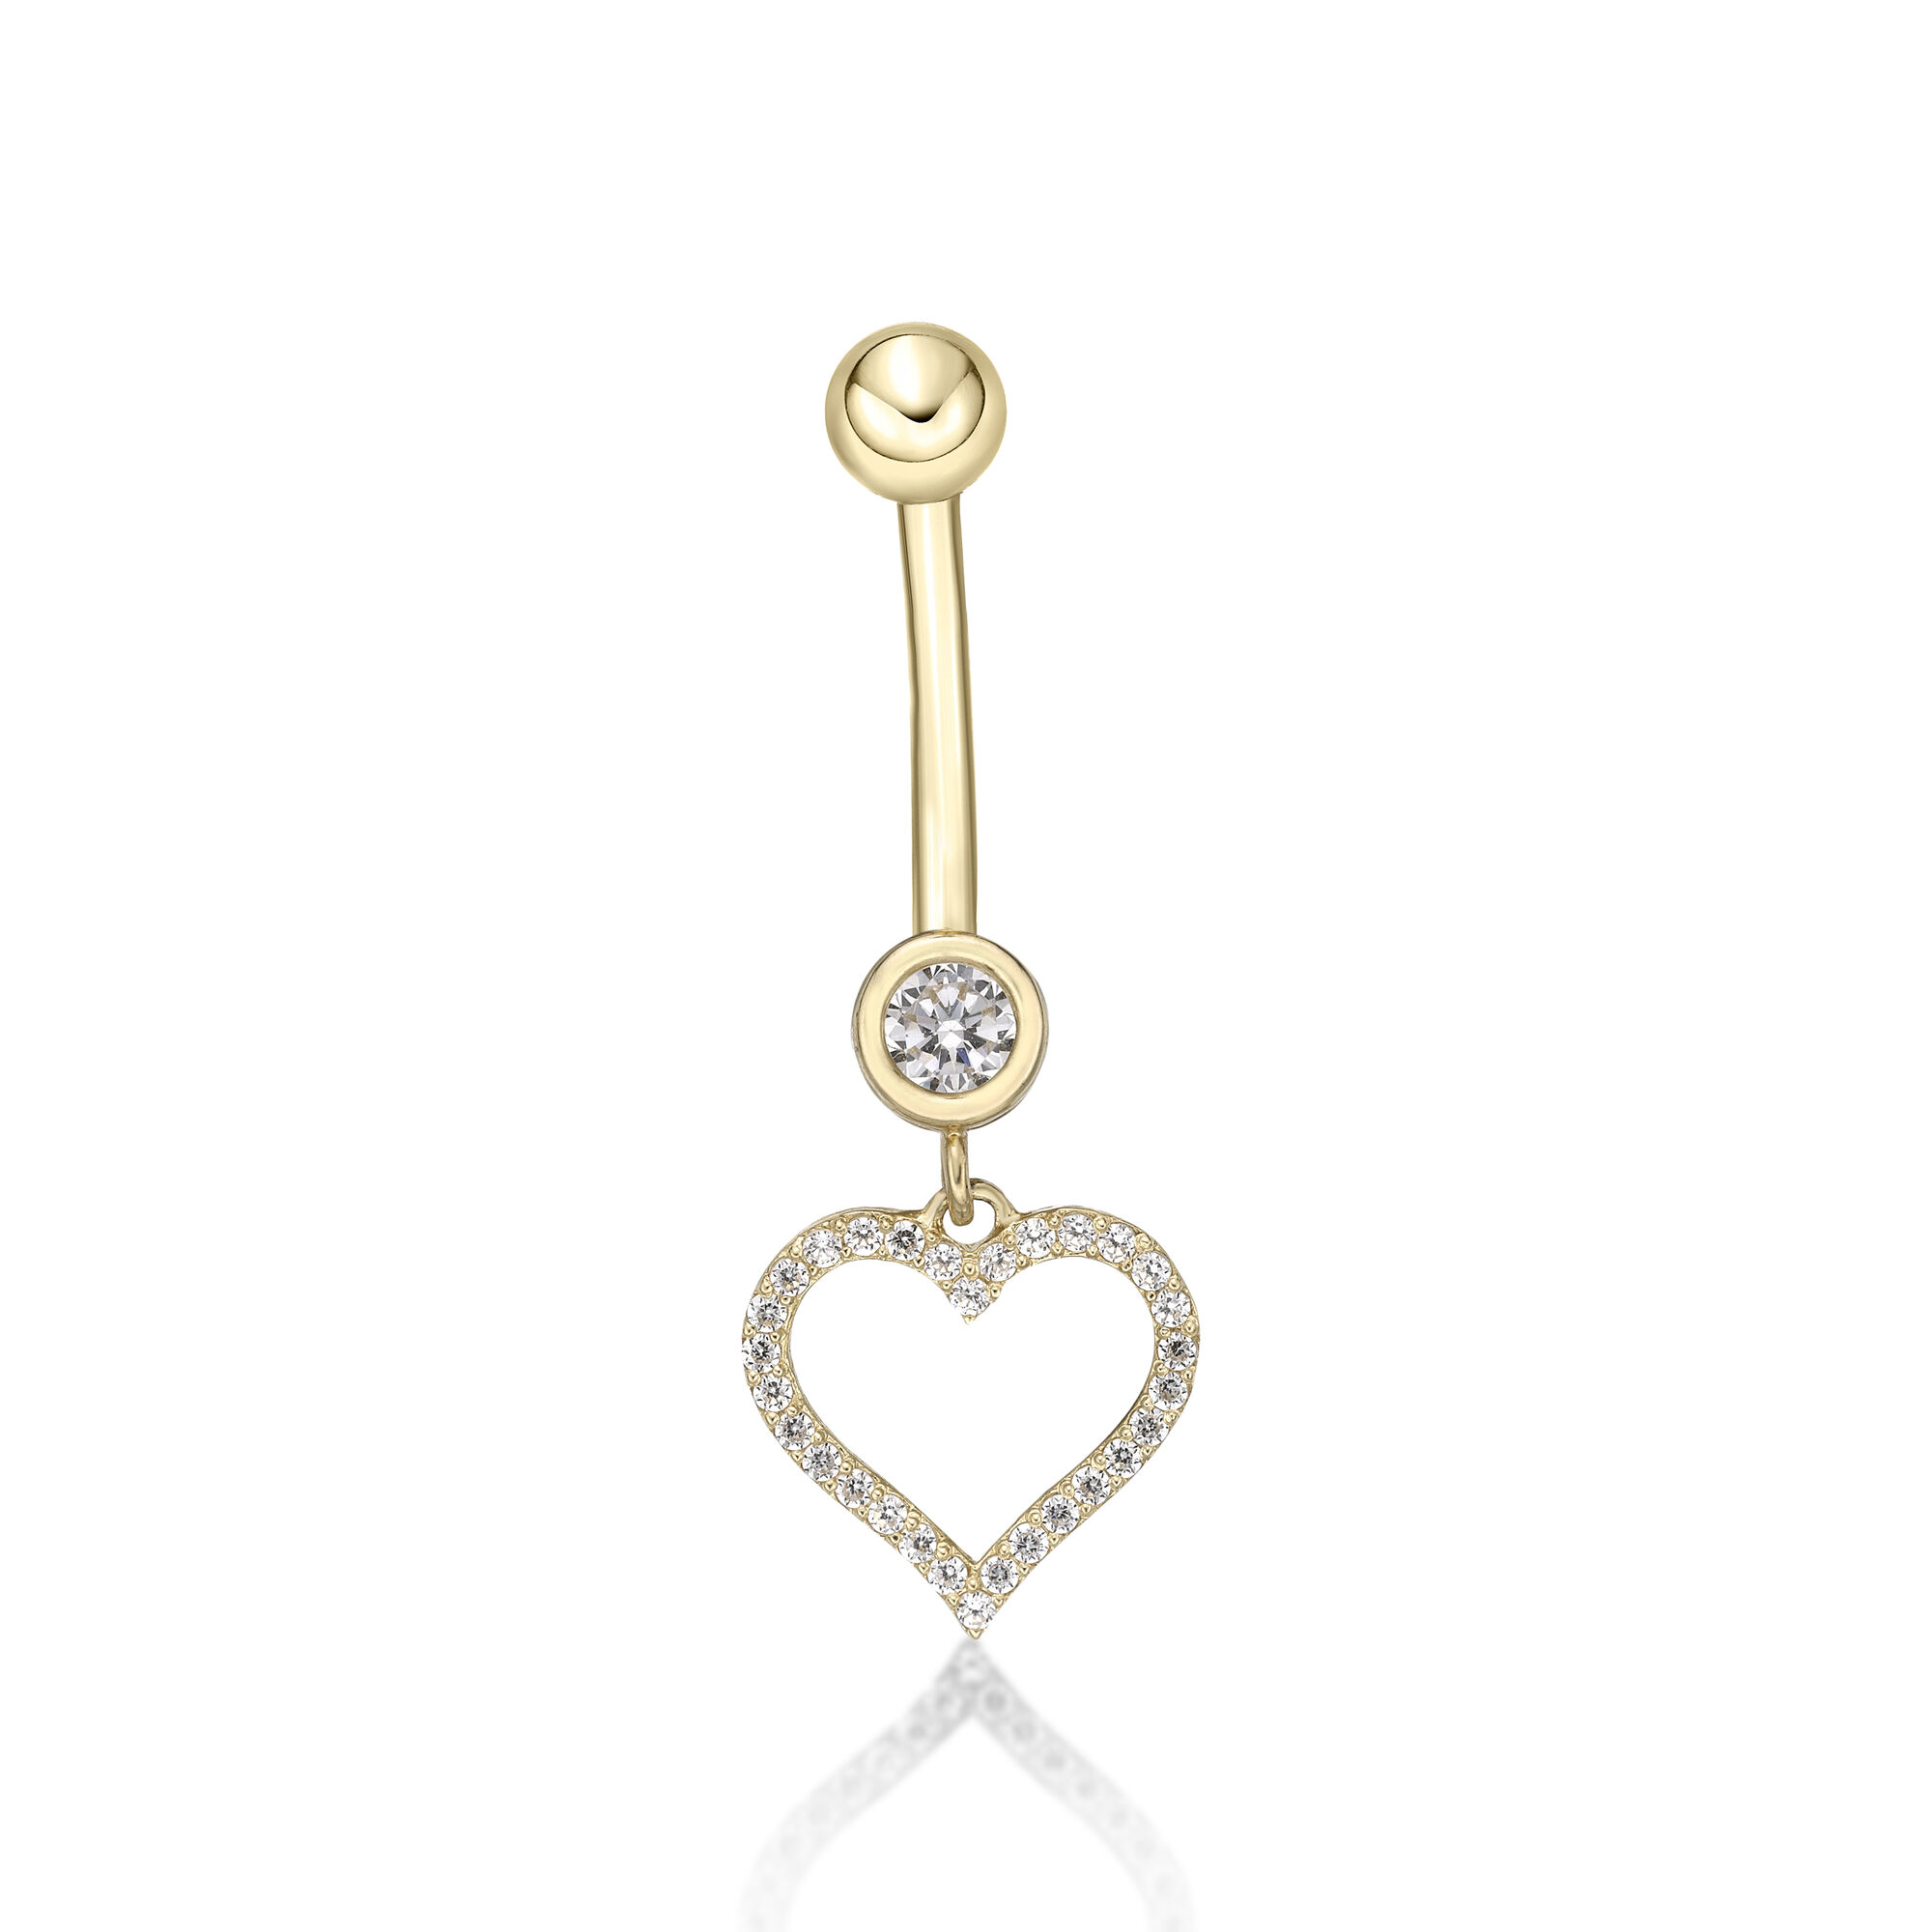 48614-belly-ring-the-piercer-yellow-gold-cubic-zirconia-48614-3.jpg